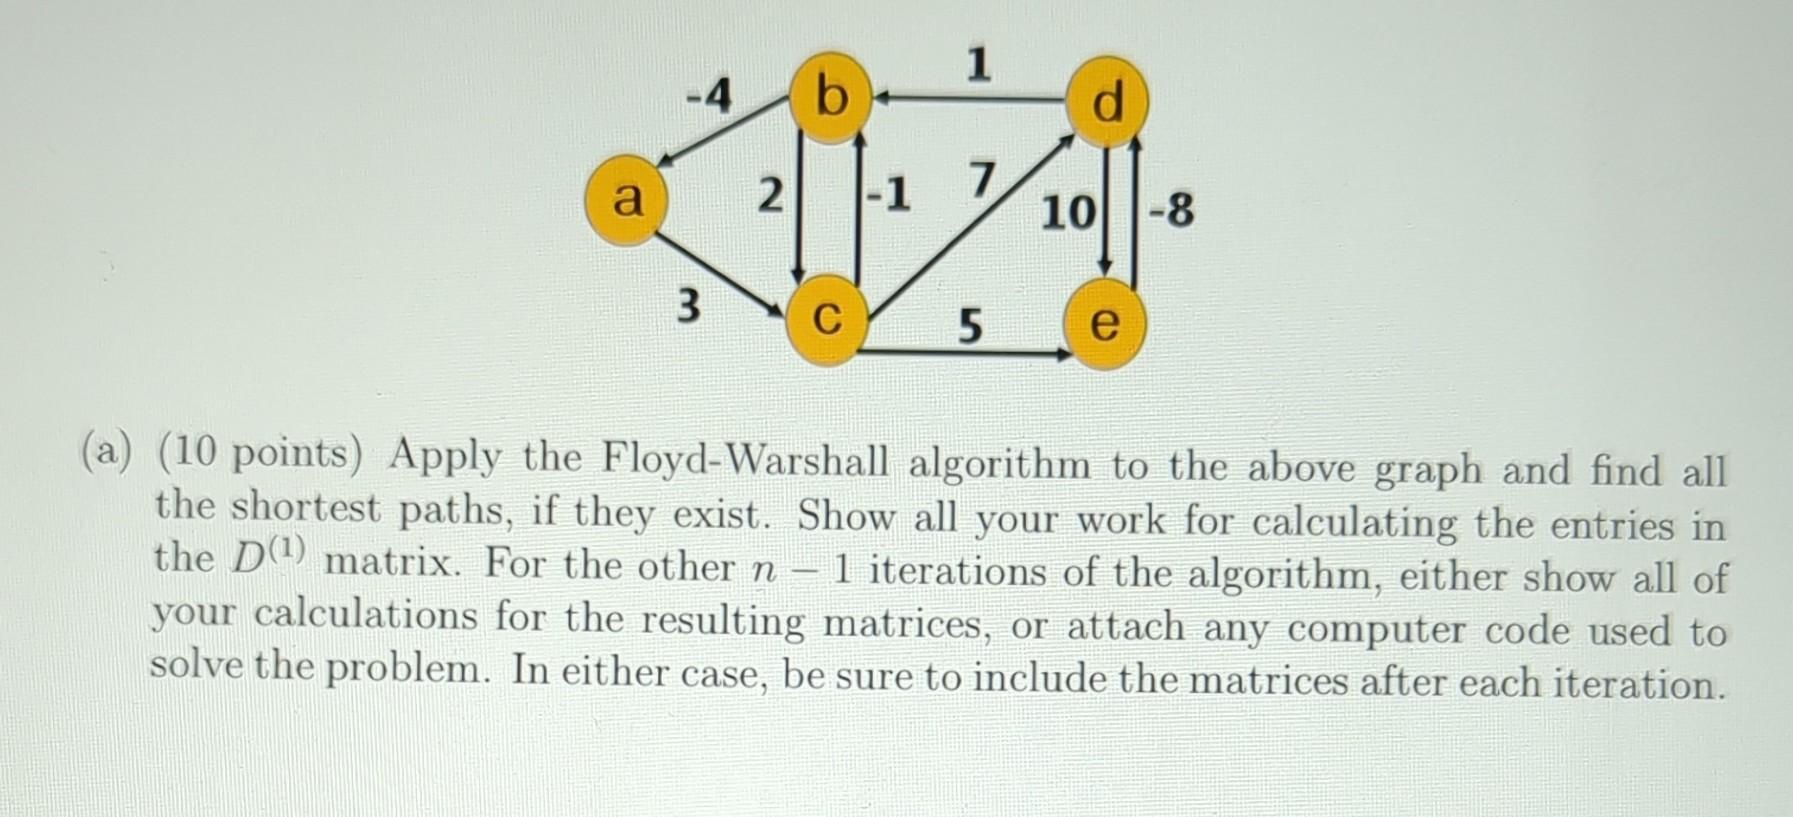 (a) (10 points) Apply the Floyd-Warshall algorithm to the above graph and find all the shortest paths, if they exist. Show al